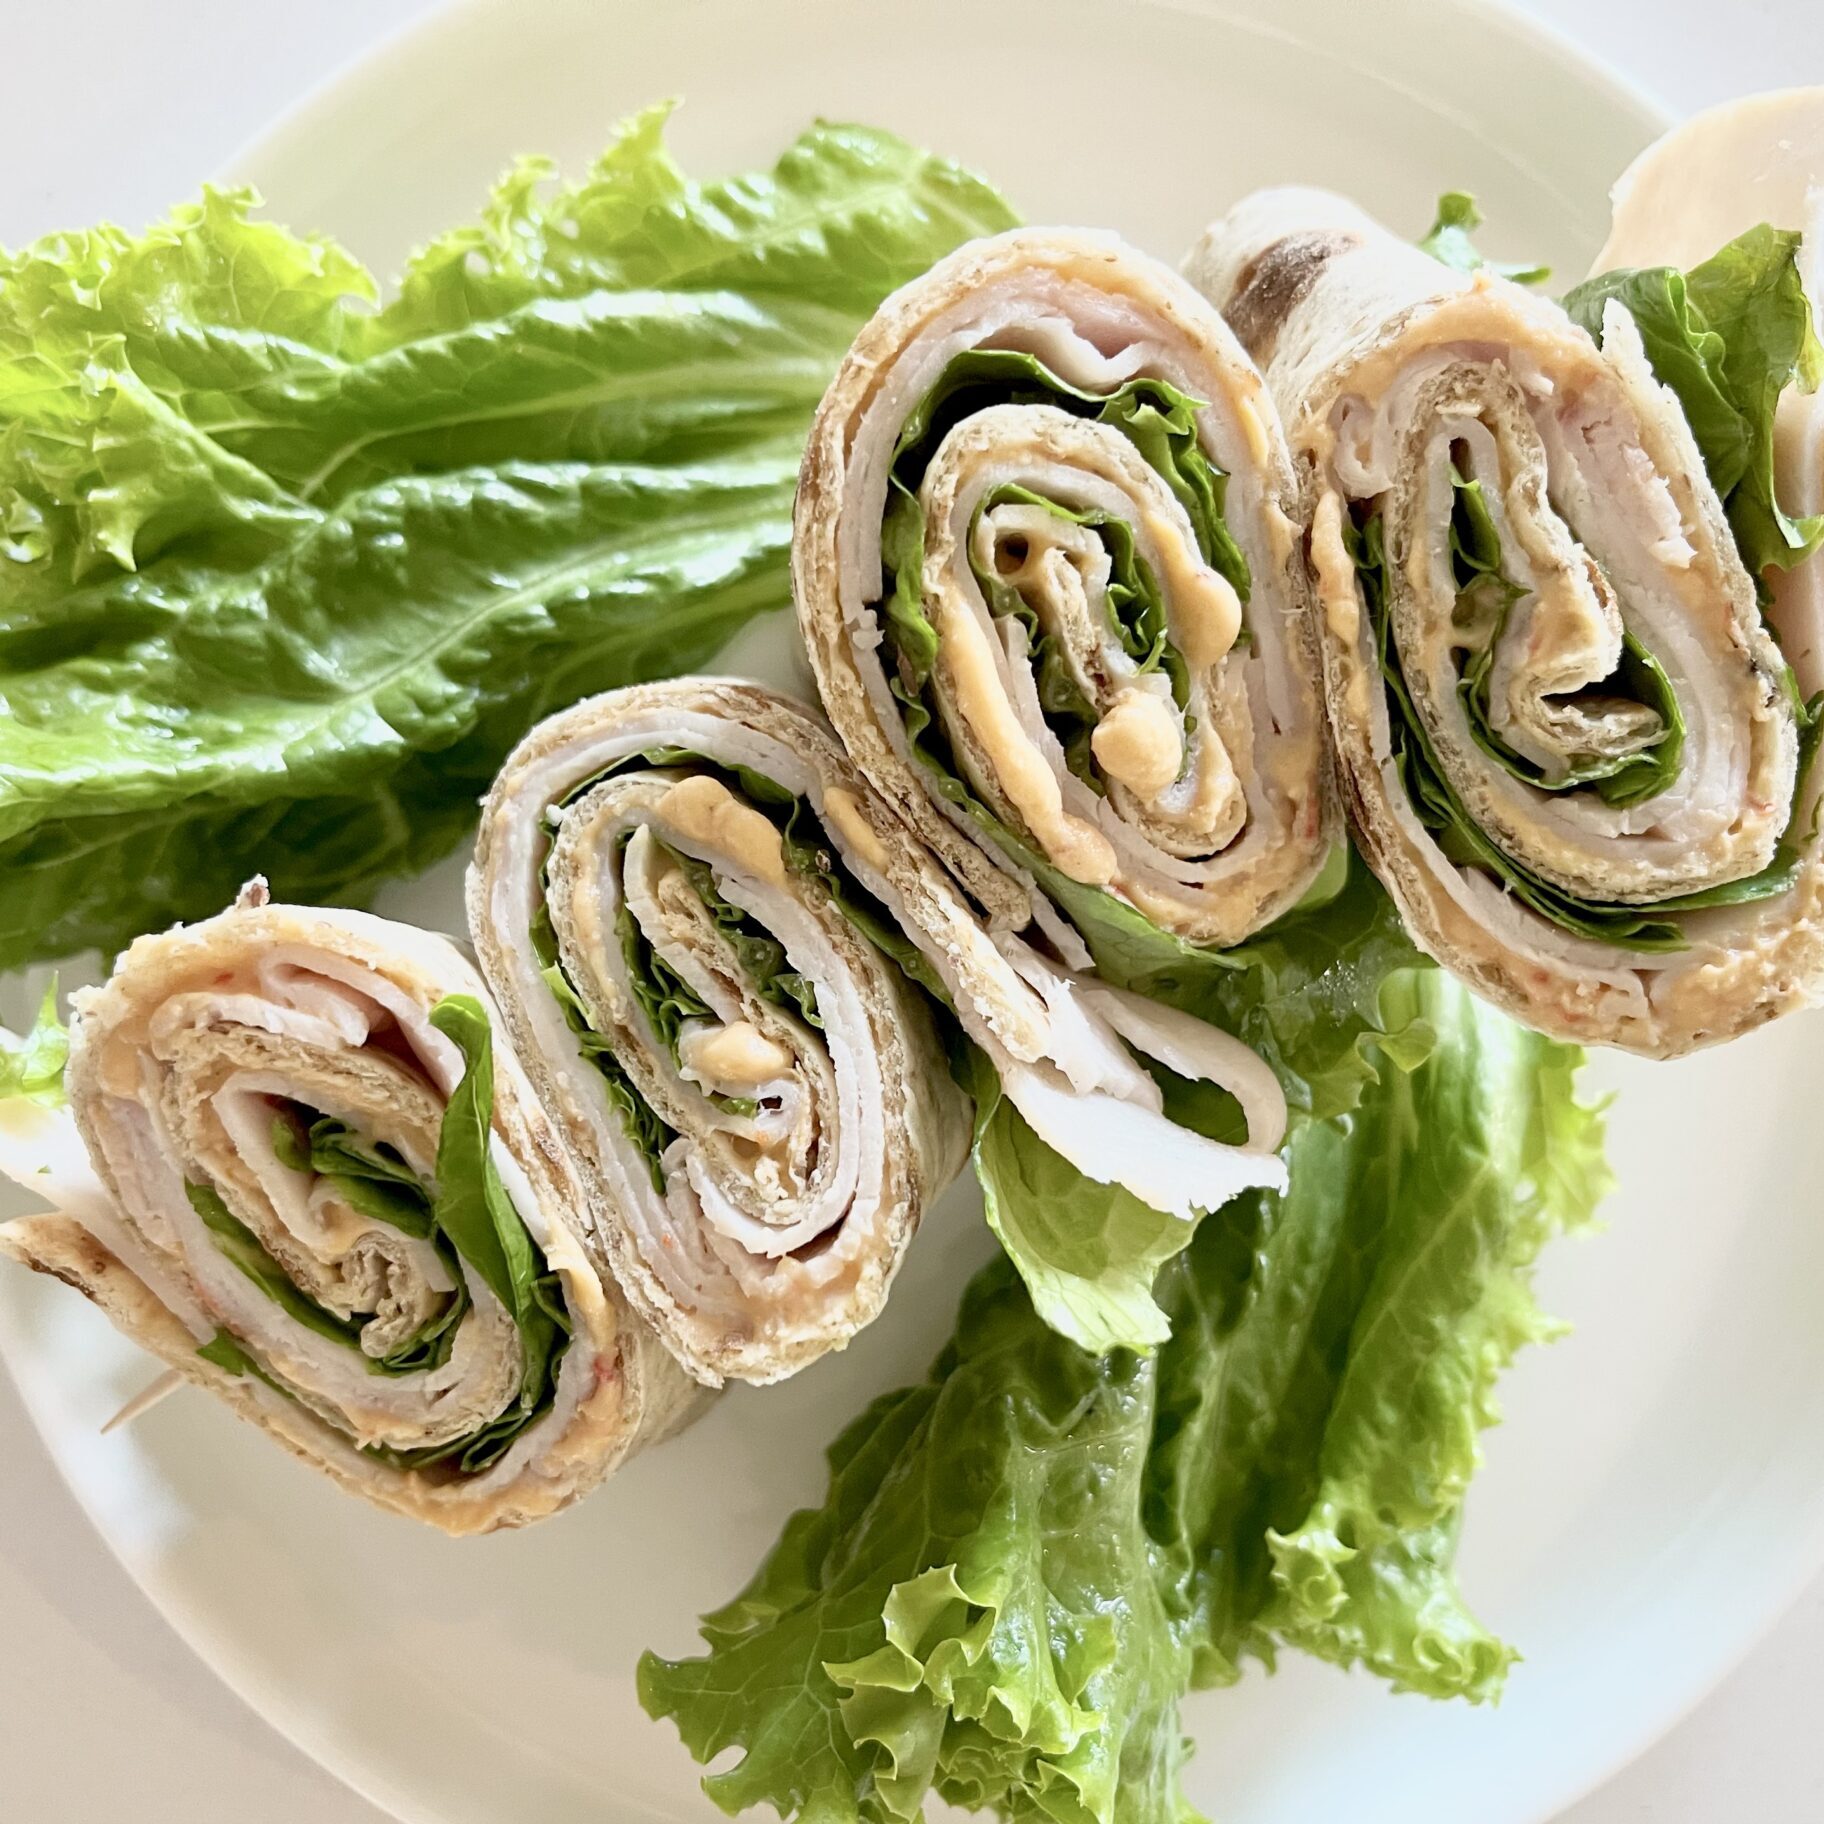 Turkey Hummus Wrap: Low Carb and High Protein